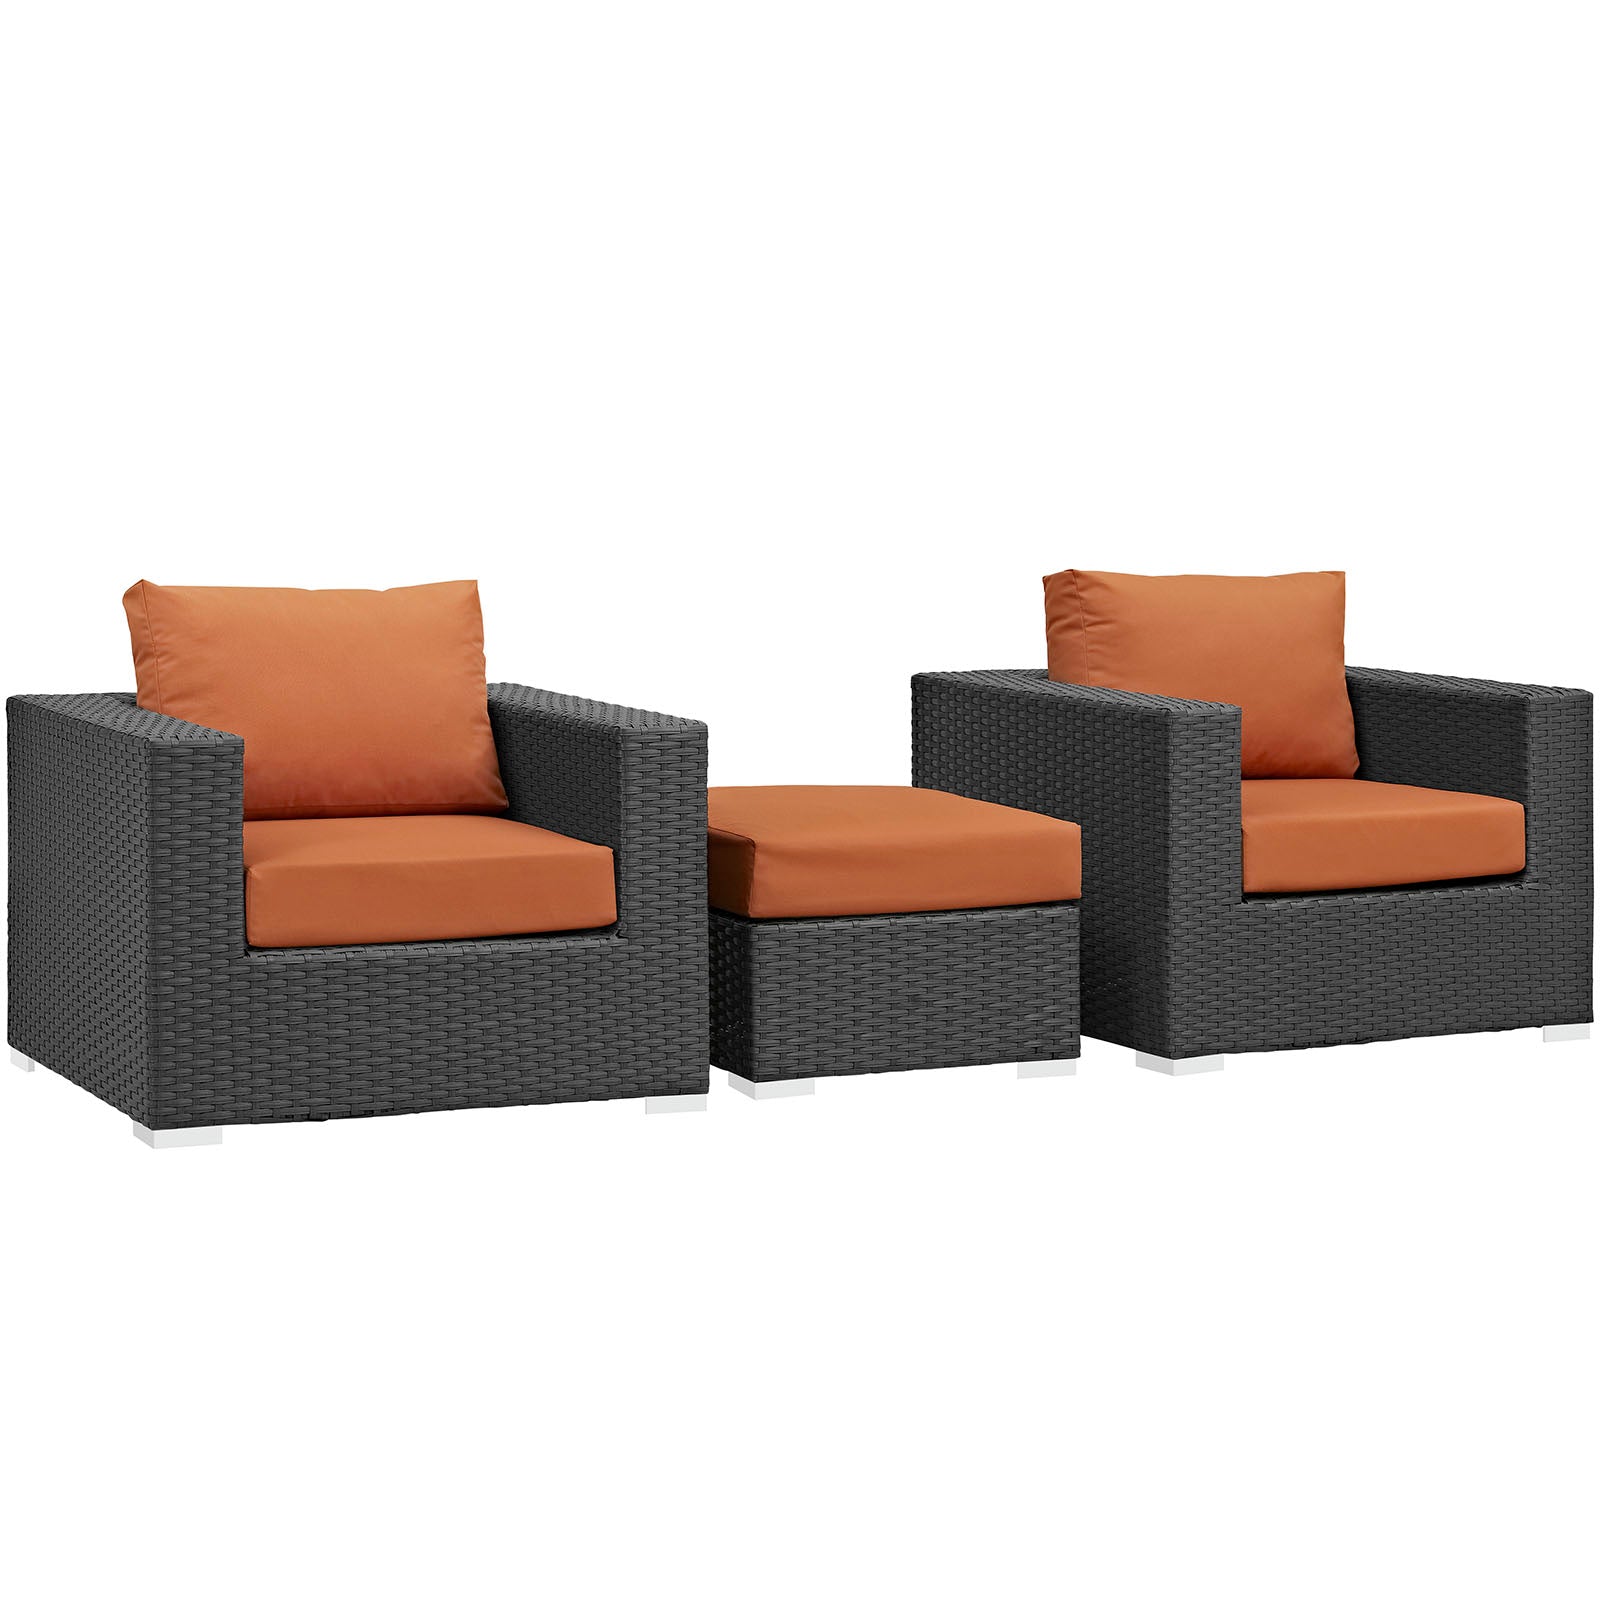 Modway Outdoor Conversation Sets - Sojourn 3 Piece Outdoor Patio Sunbrella Sectional Set Canvas Tuscan